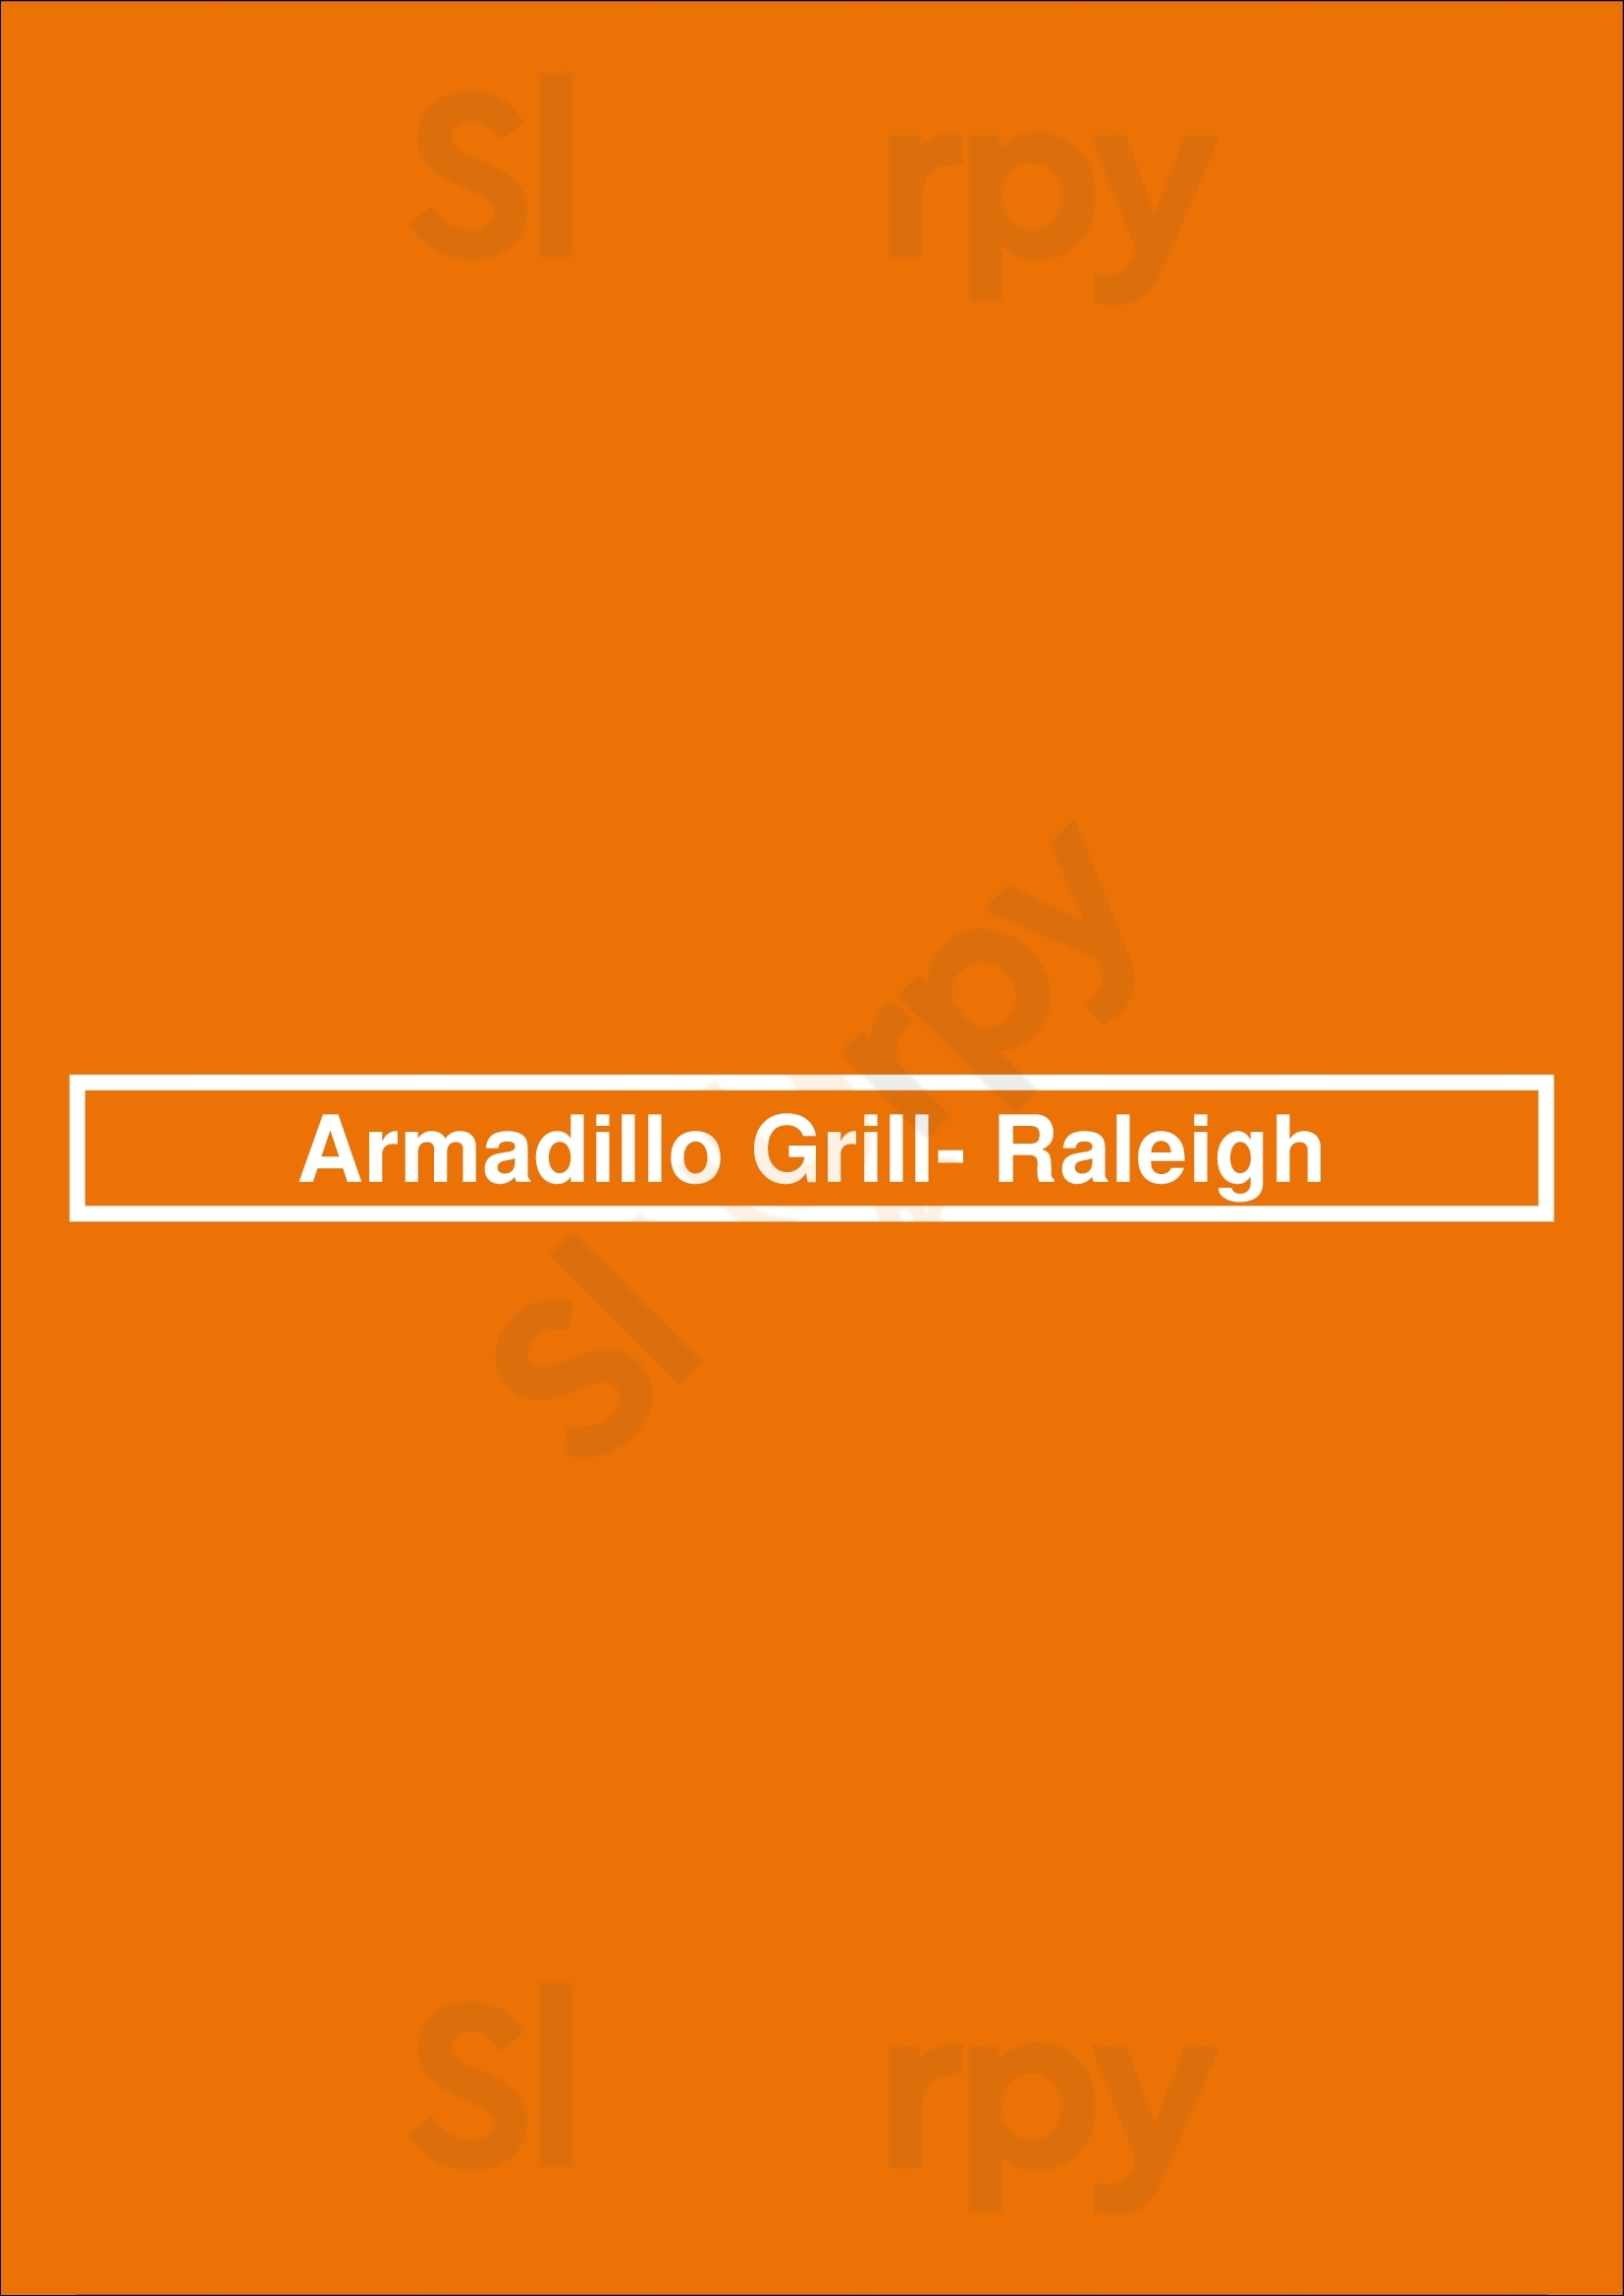 Armadillo Grill- Raleigh Raleigh Menu - 1